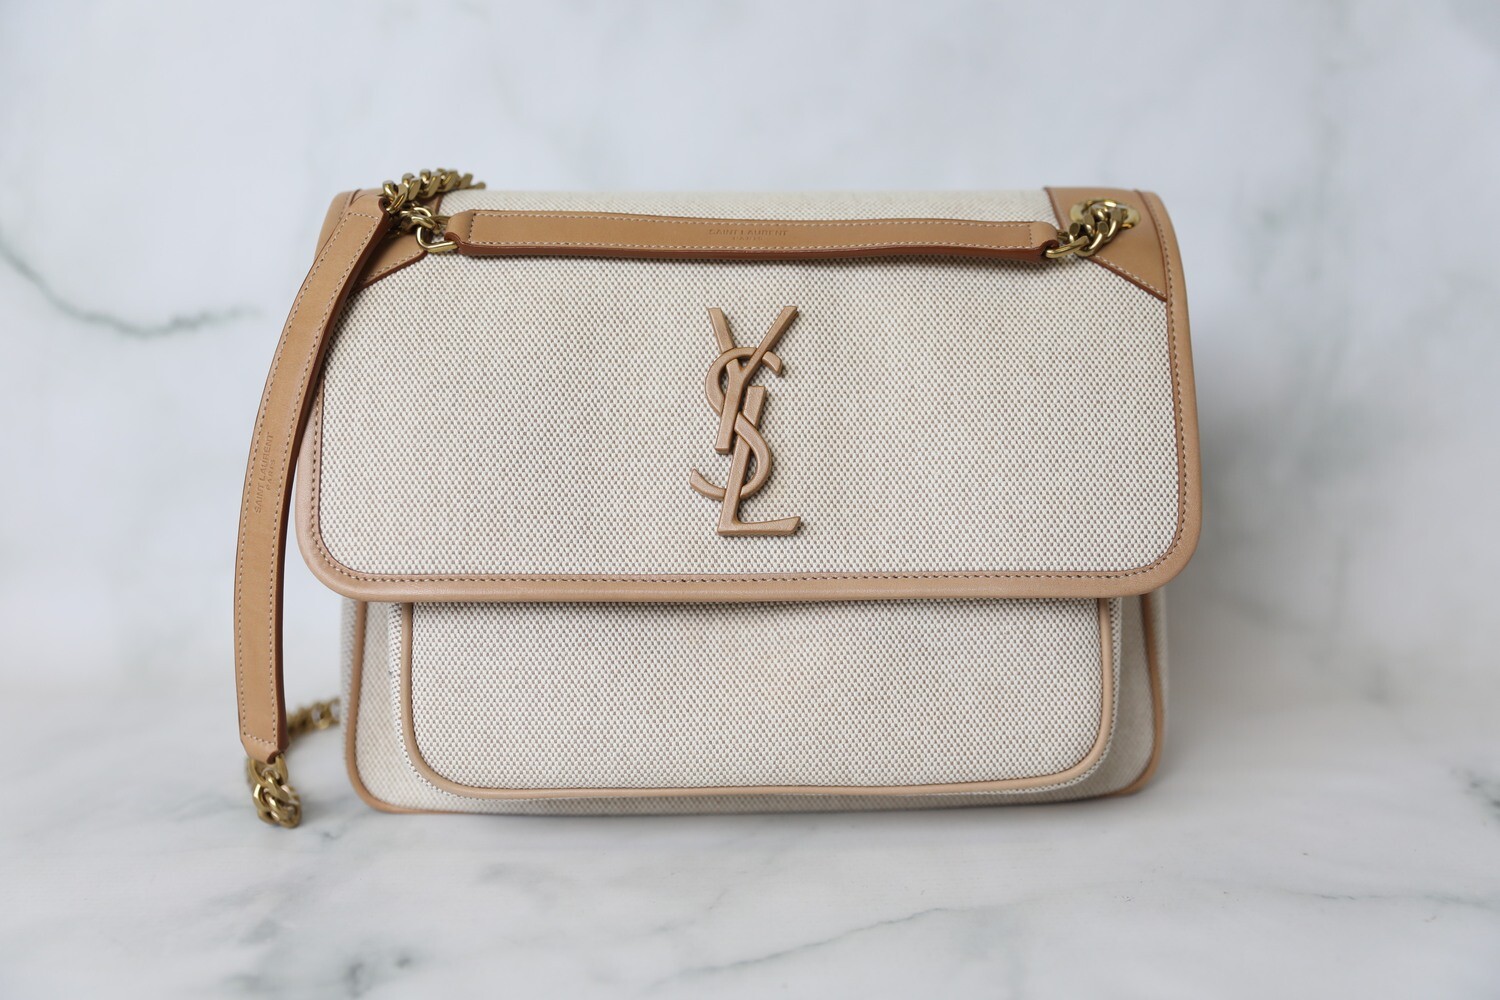 Saint Laurent Niki Medium, Beige Canvas with Tan Leather Trim, Preowned in Dustbag WA001